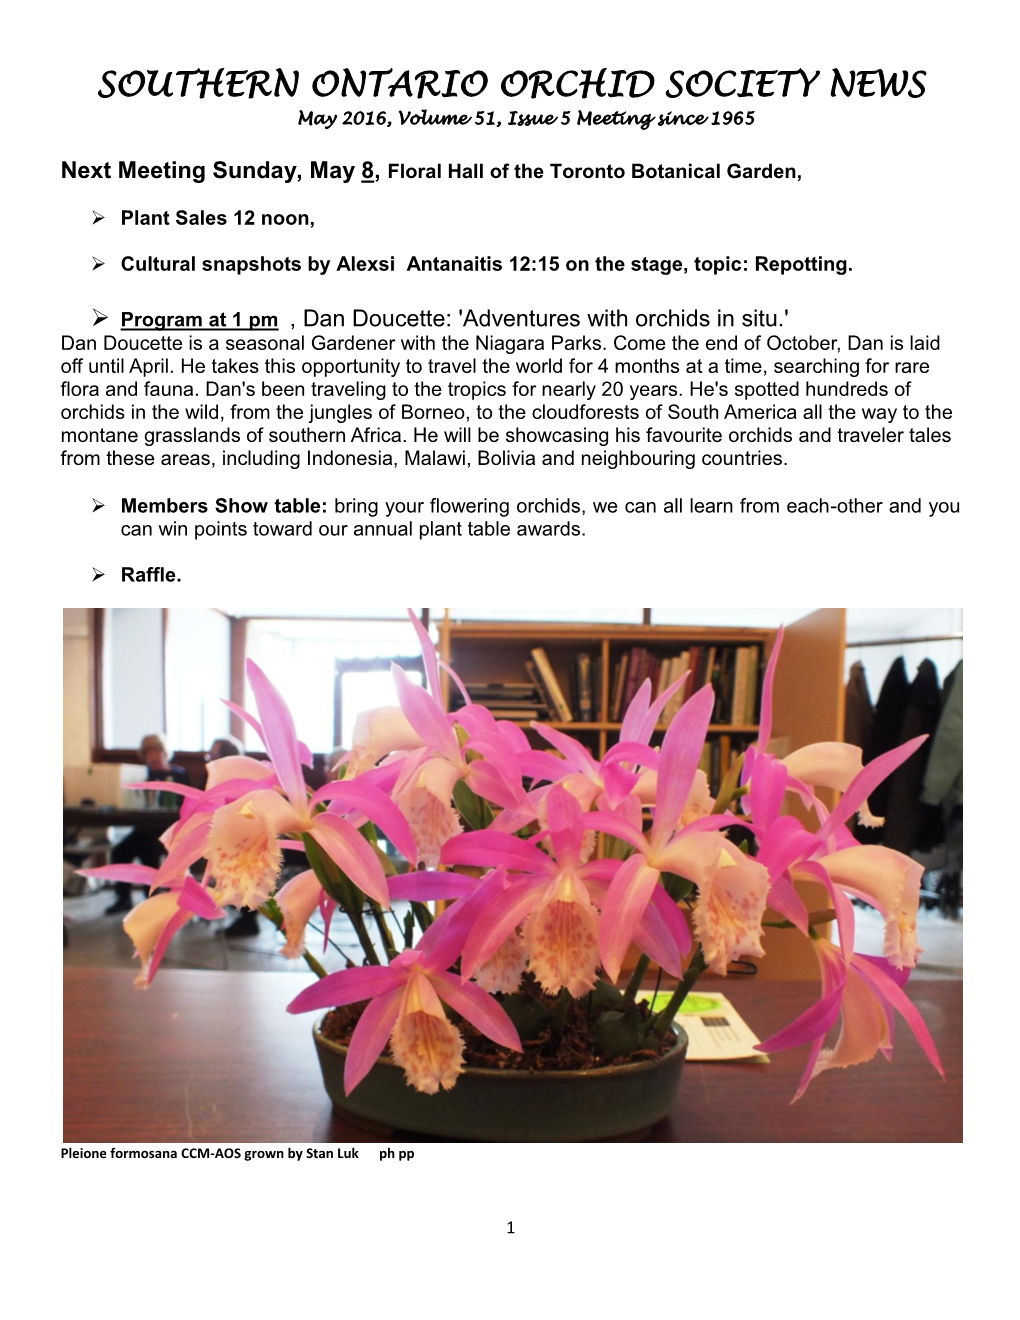 SOUTHERN ONTARIO ORCHID SOCIETY NEWS May 2016, Volume 51, Issue 5 Meeting Since 1965